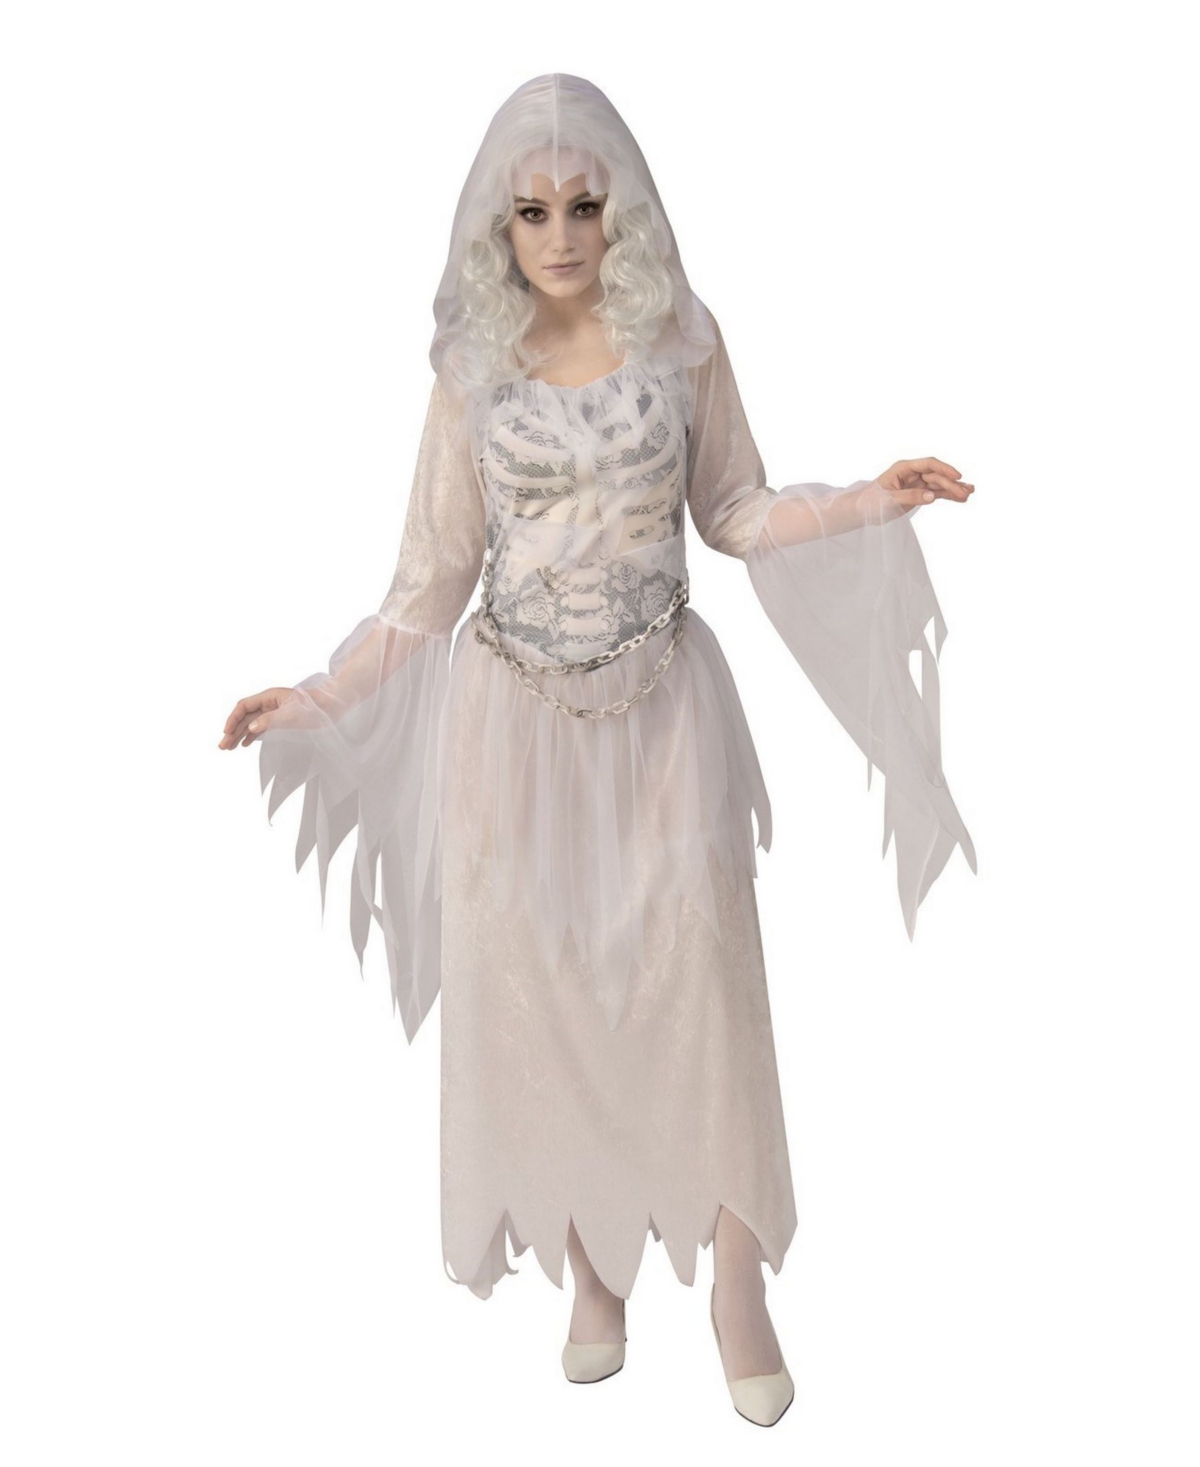 Women's Ghostly Woman Adult Costume - White